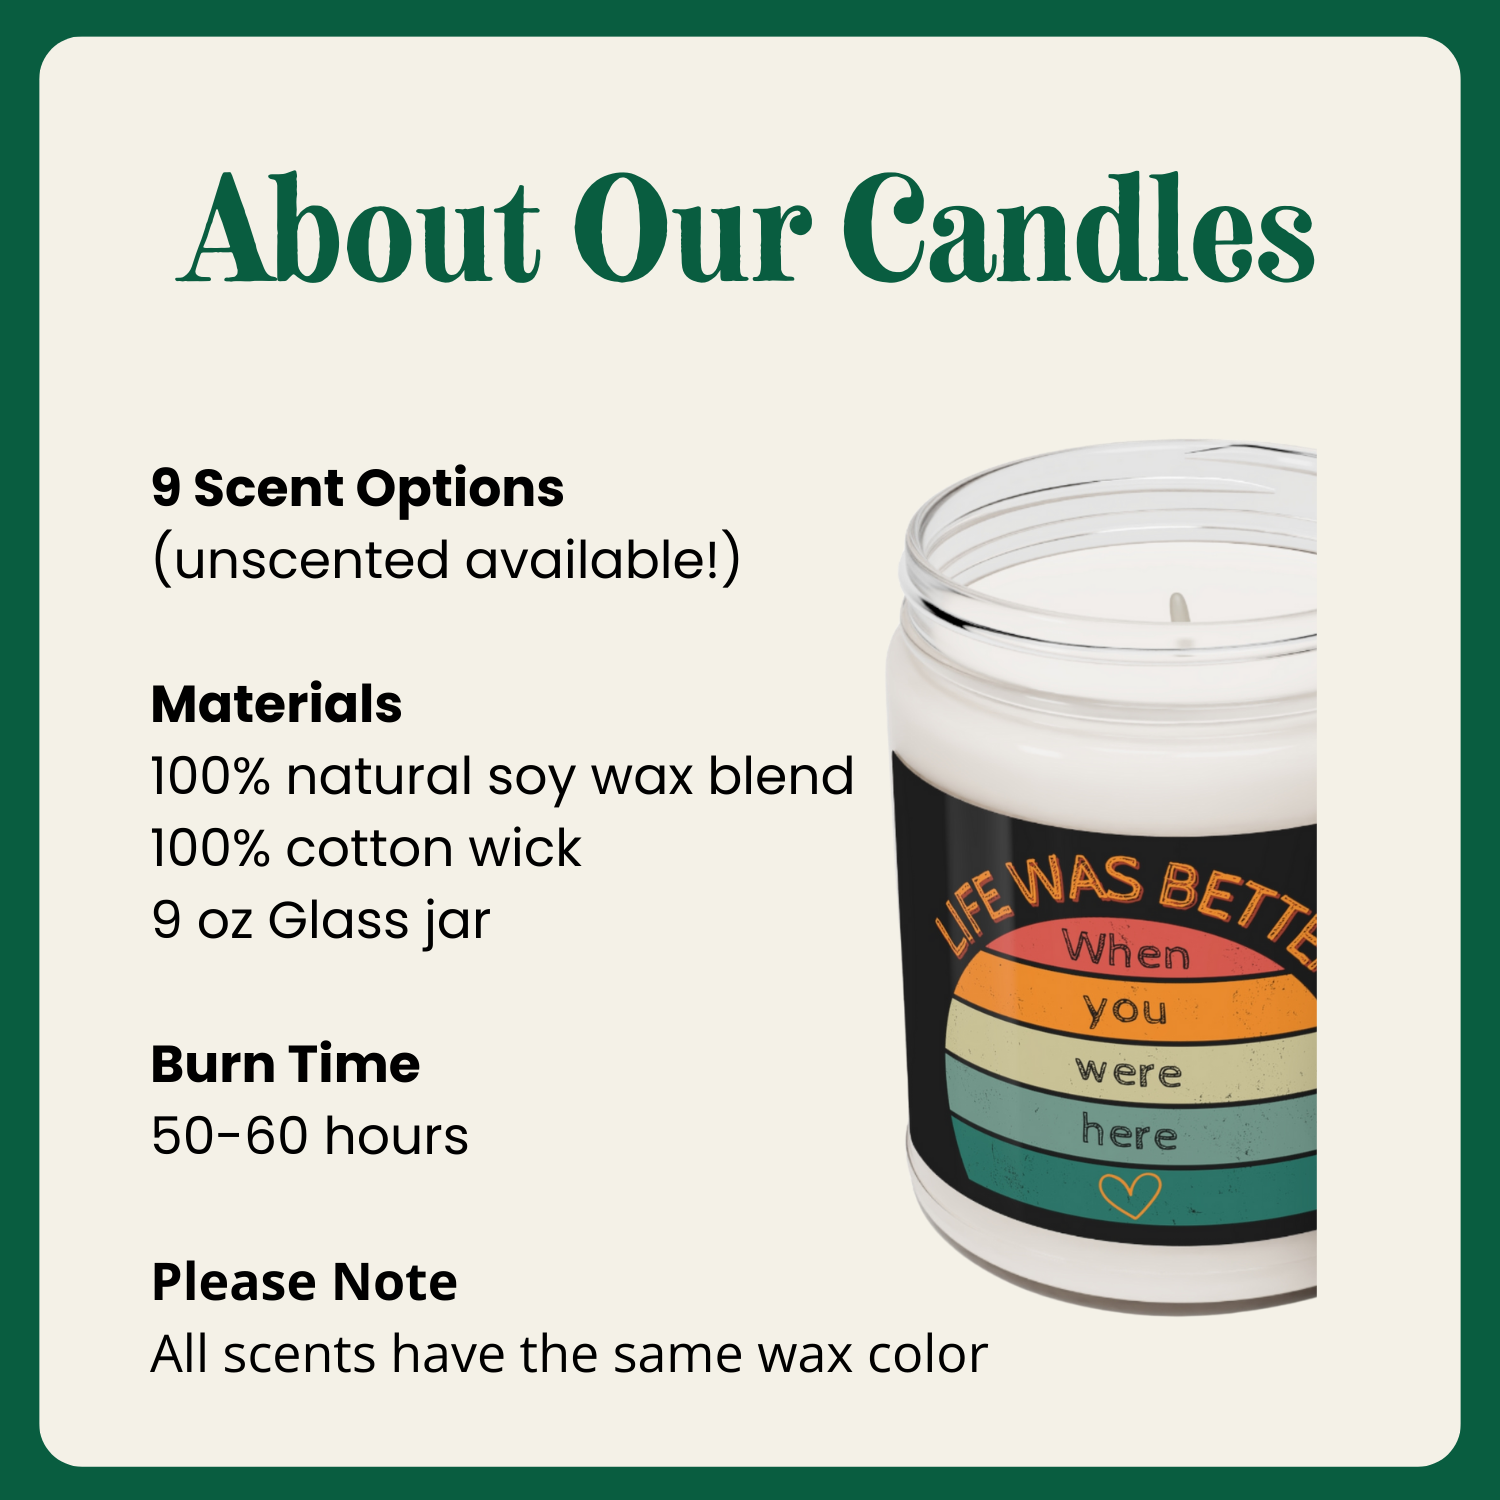 50-60 hours burn time, 100% natural soy wax blend, all scents have the same wax color